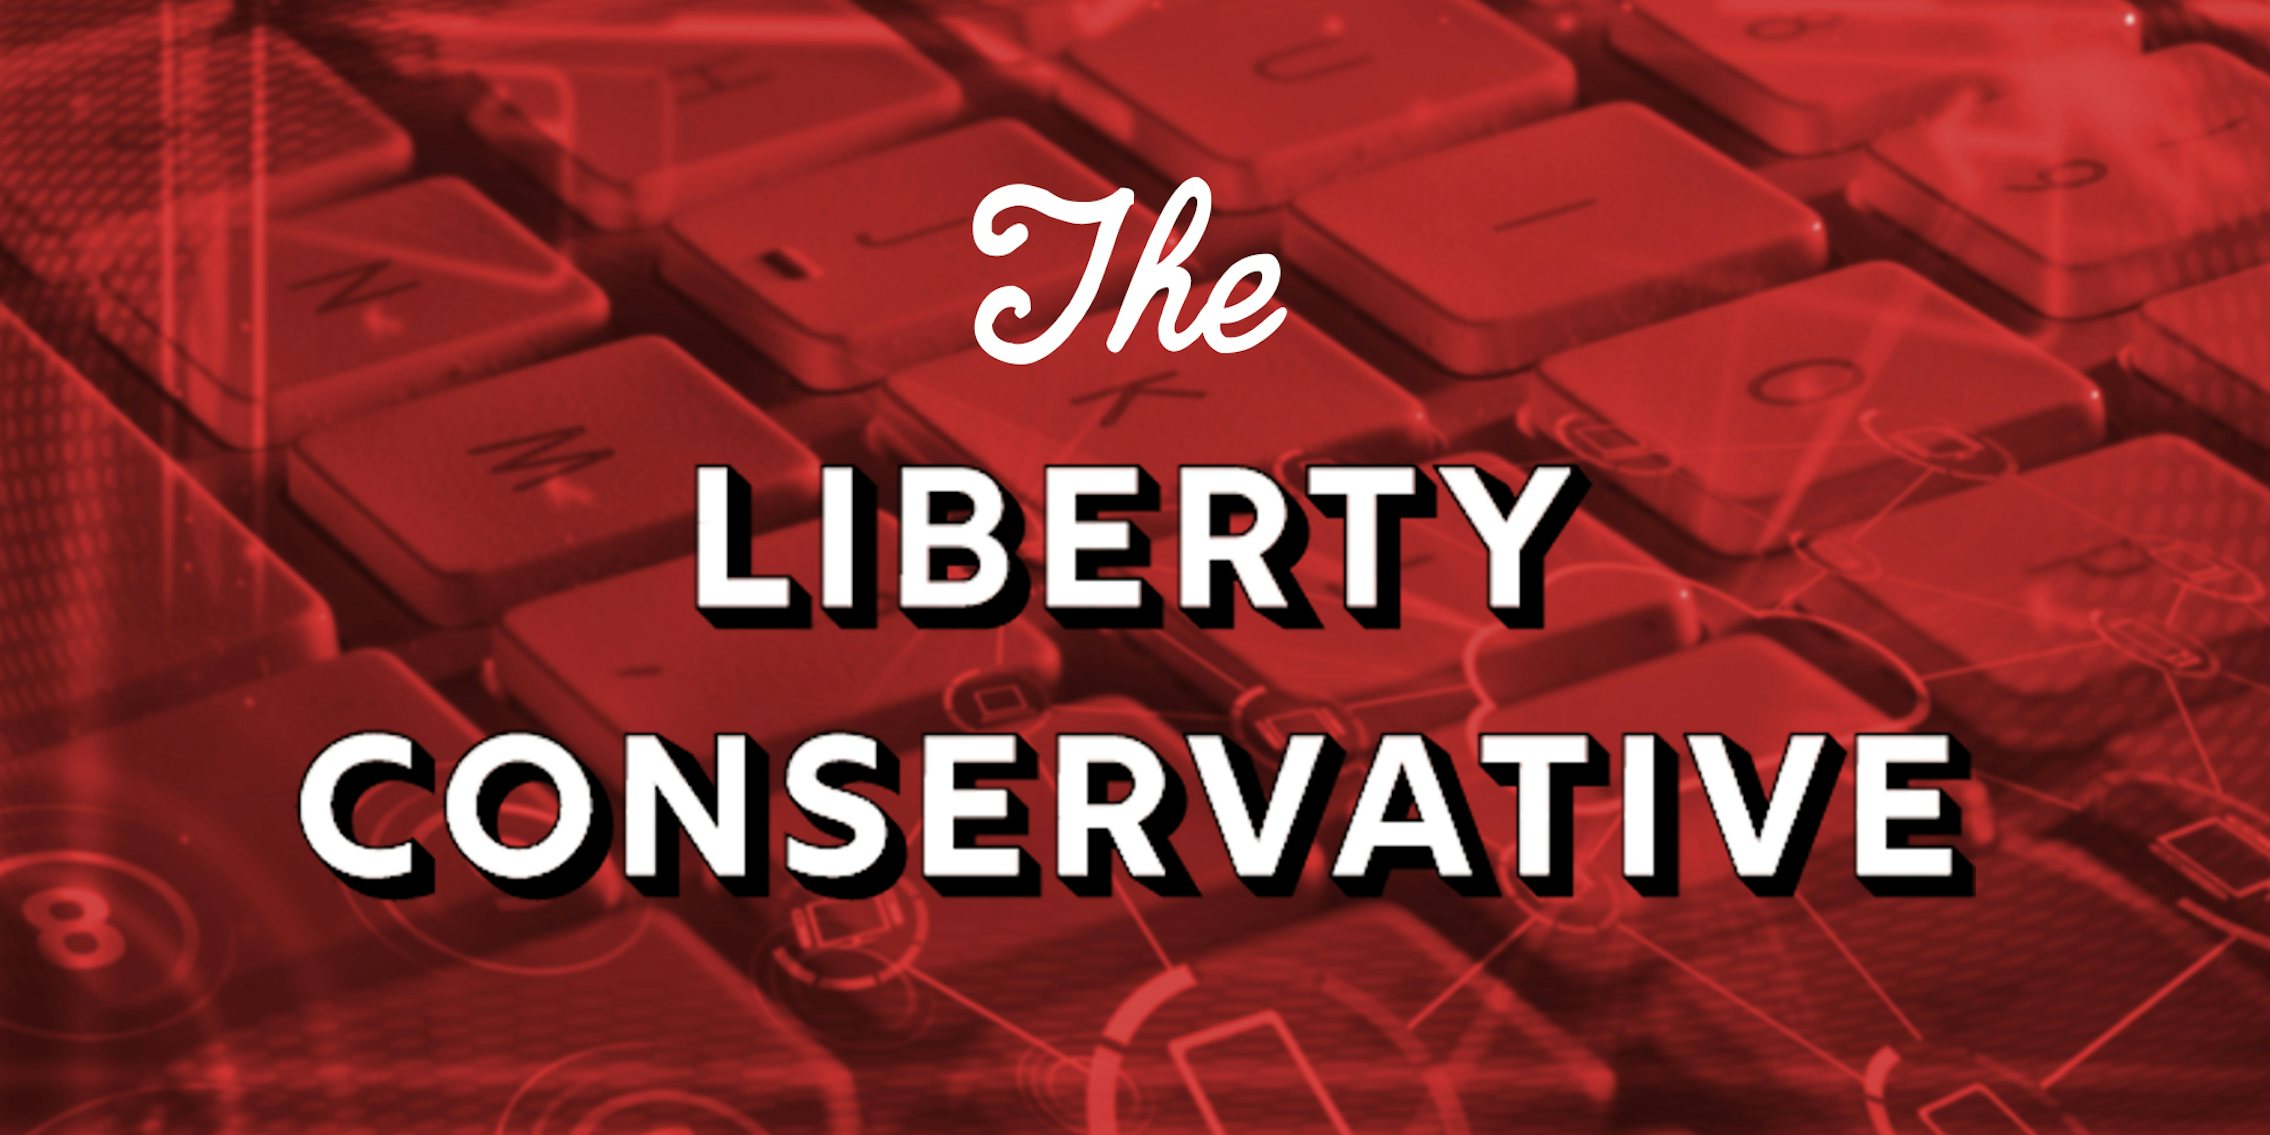 keyboard with red overlay with The Liberty Conservative logo centered